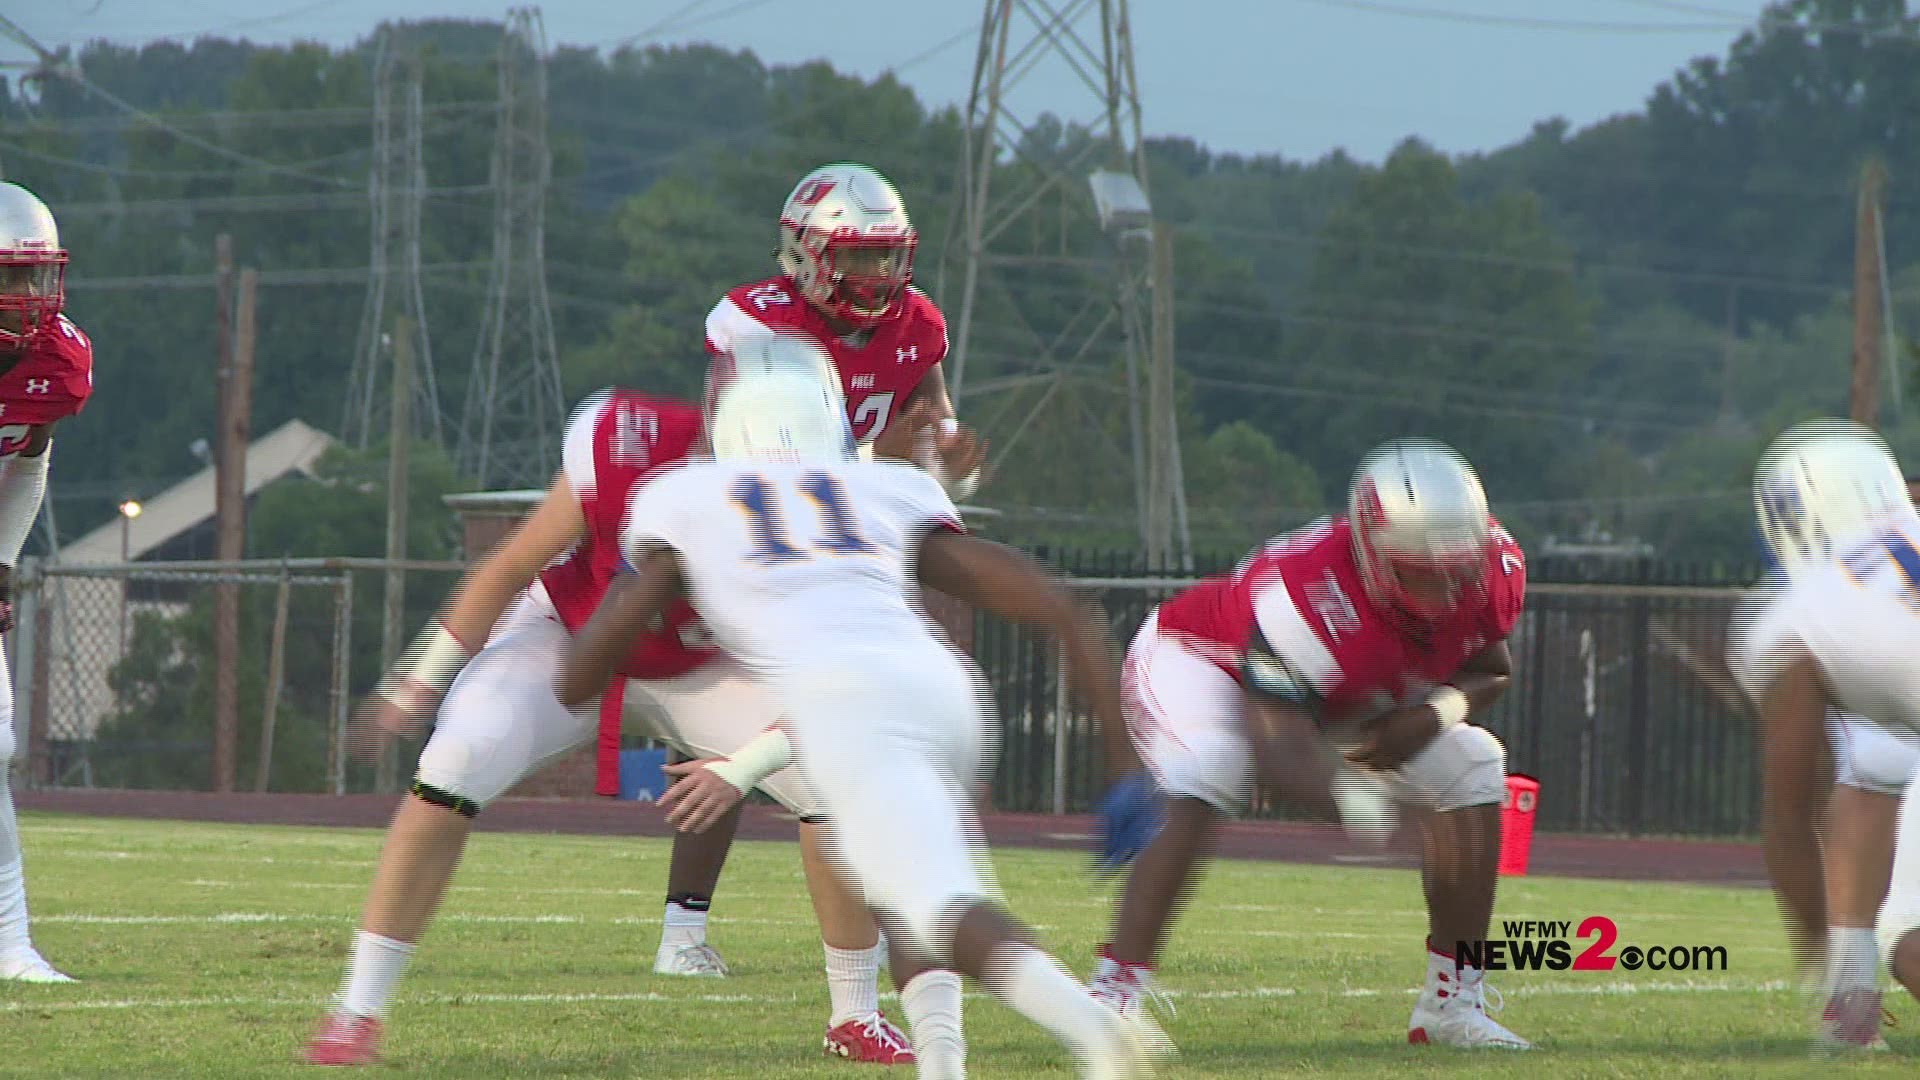 Some highlights from the Page vs Eastern Guilford game as seen of Friday Football Fever.